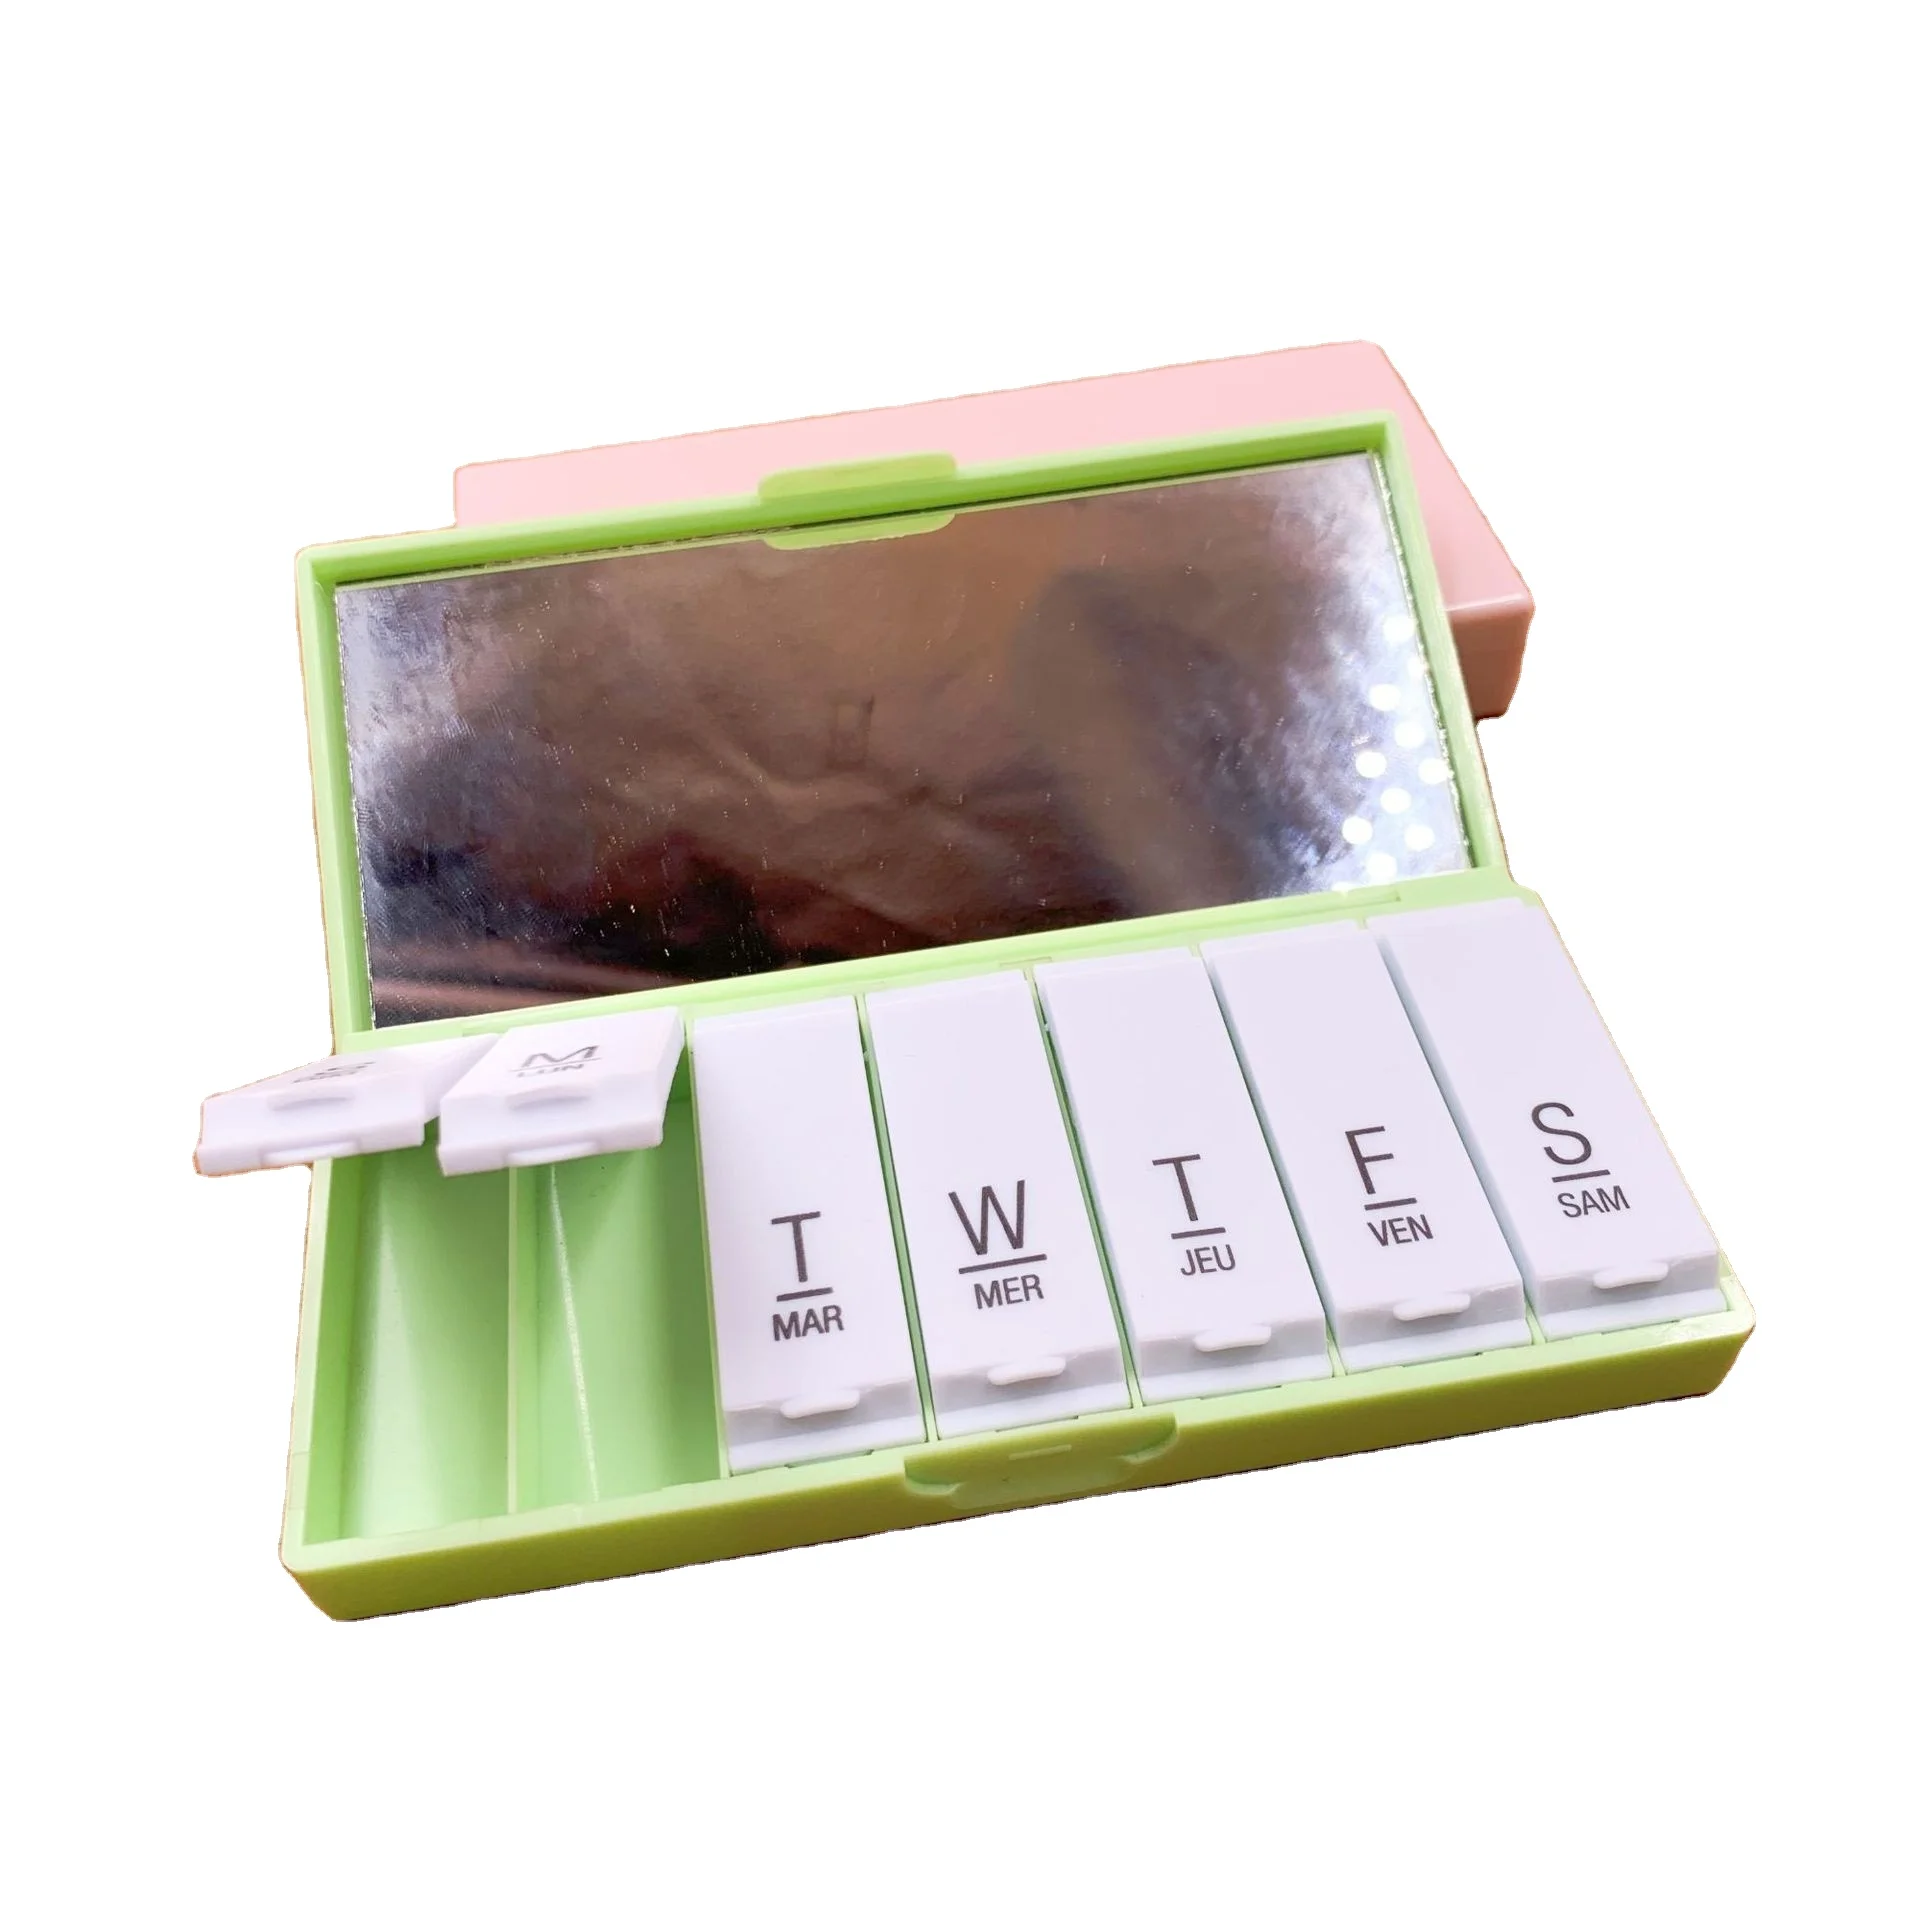 Plastic organizer tablet storage cases Customize logo 7 compartment days weekly pill box with mirror